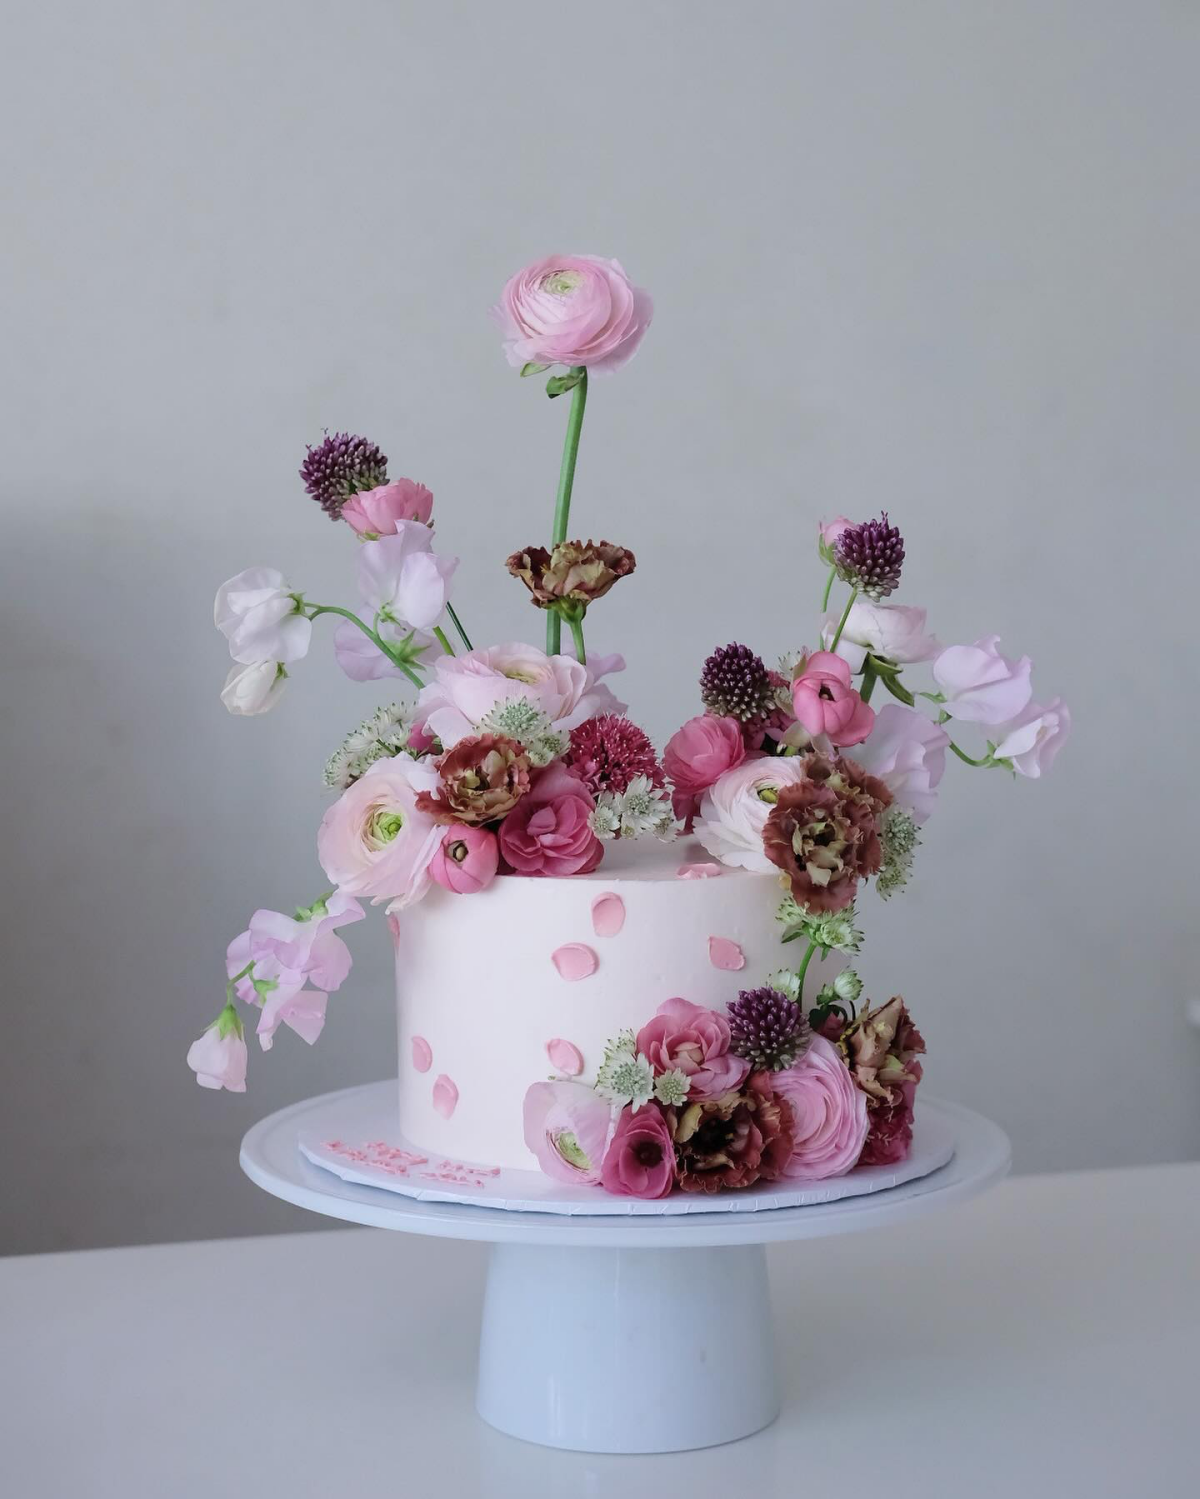 Cake With Flowers: 13 Beautiful Ideas For Every Occasion